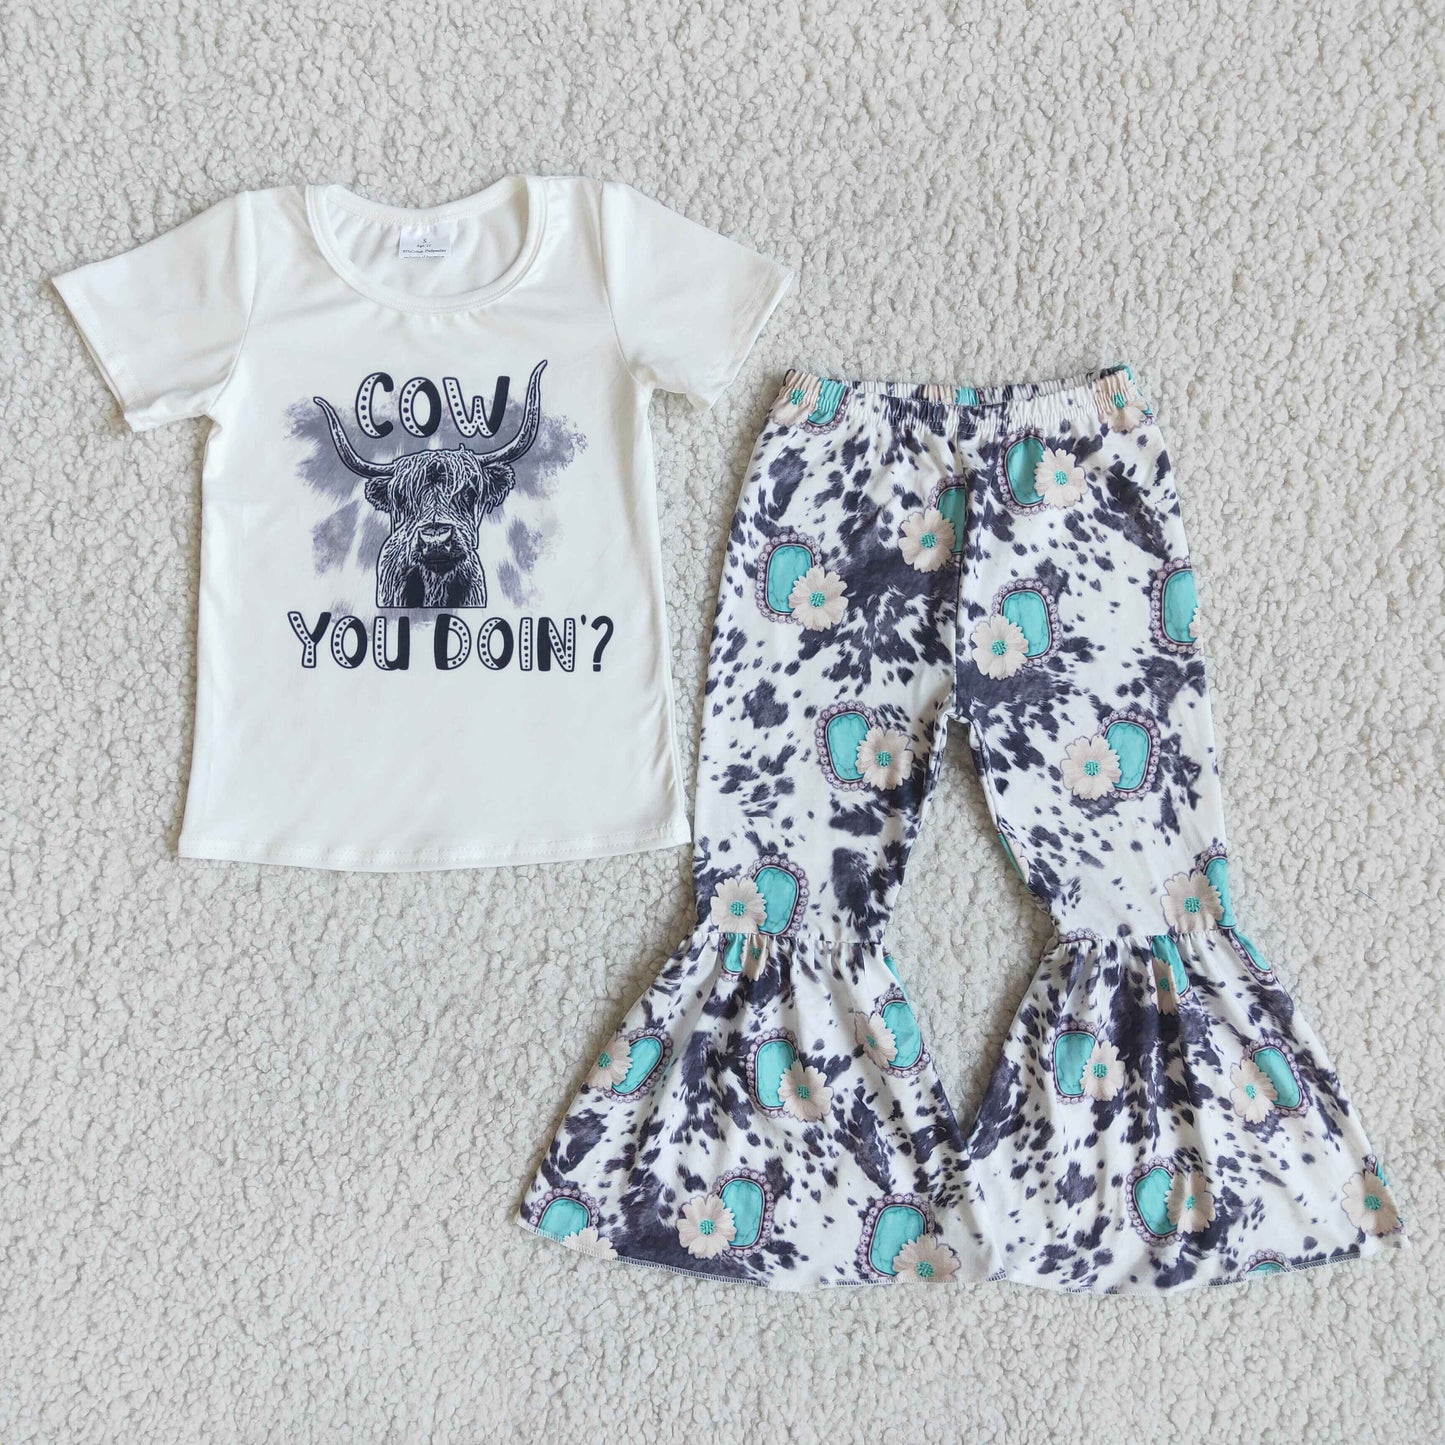 new cow summer bell bottom pants outfit